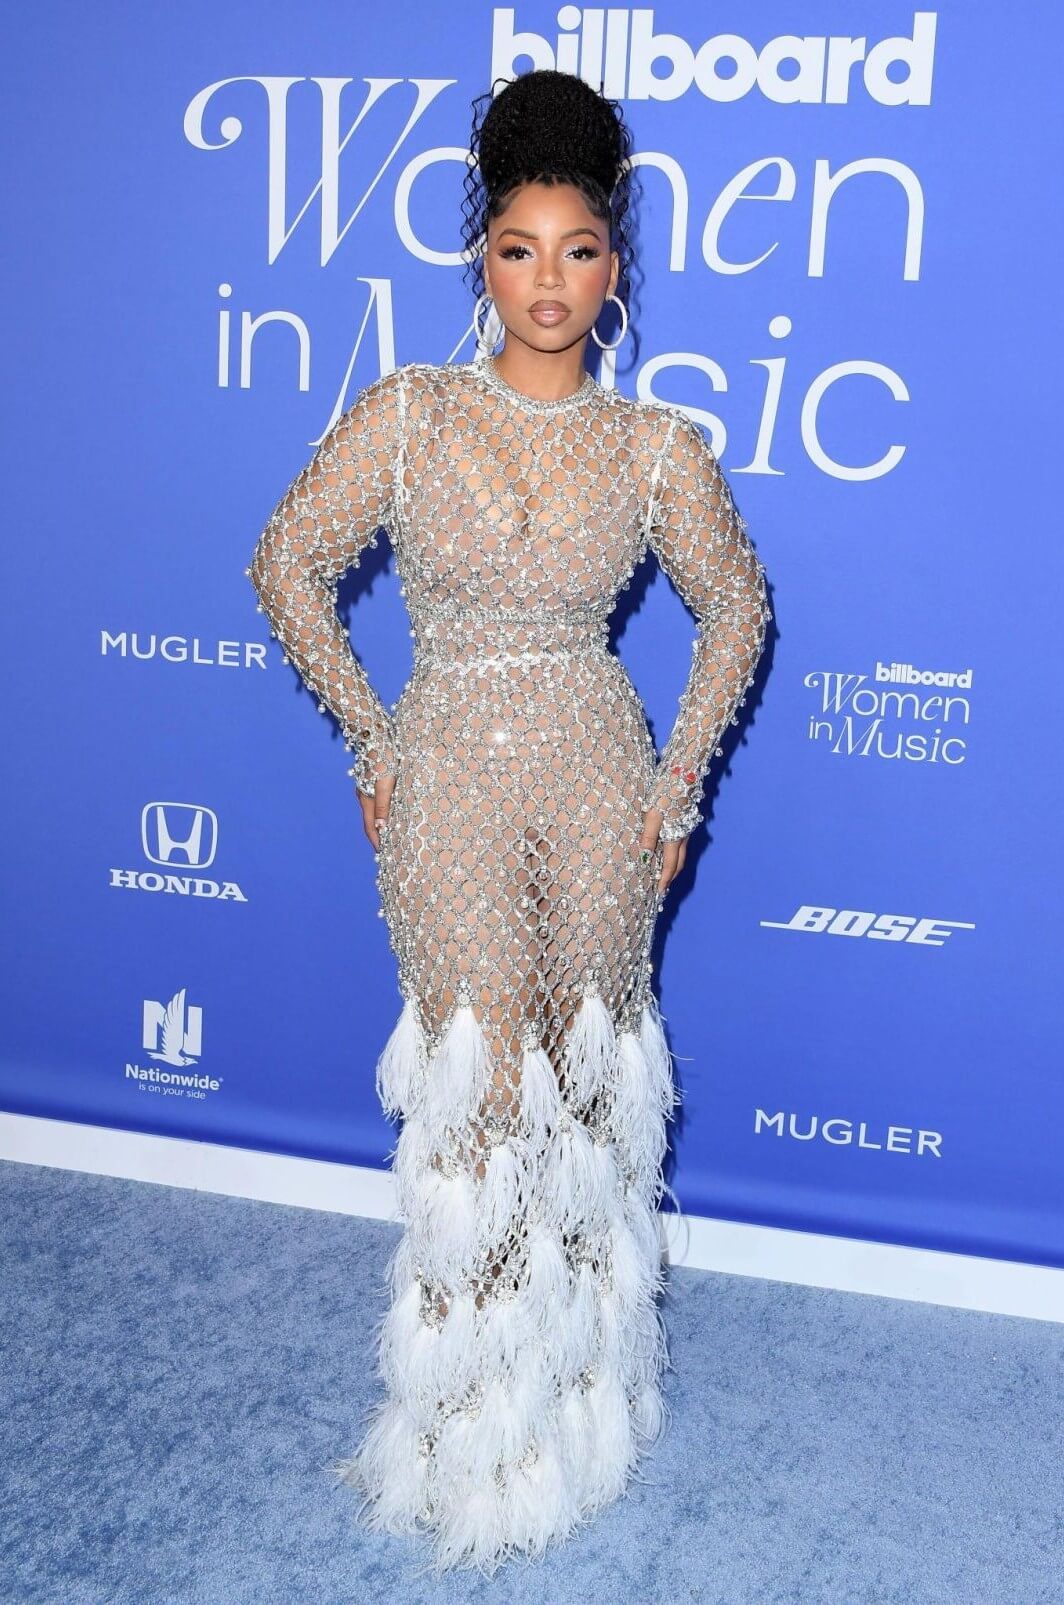 Chloe Bailey In Silver Shimmery With Feather Style Long Gown At Billboard Women in Music Awards in Los Angeles